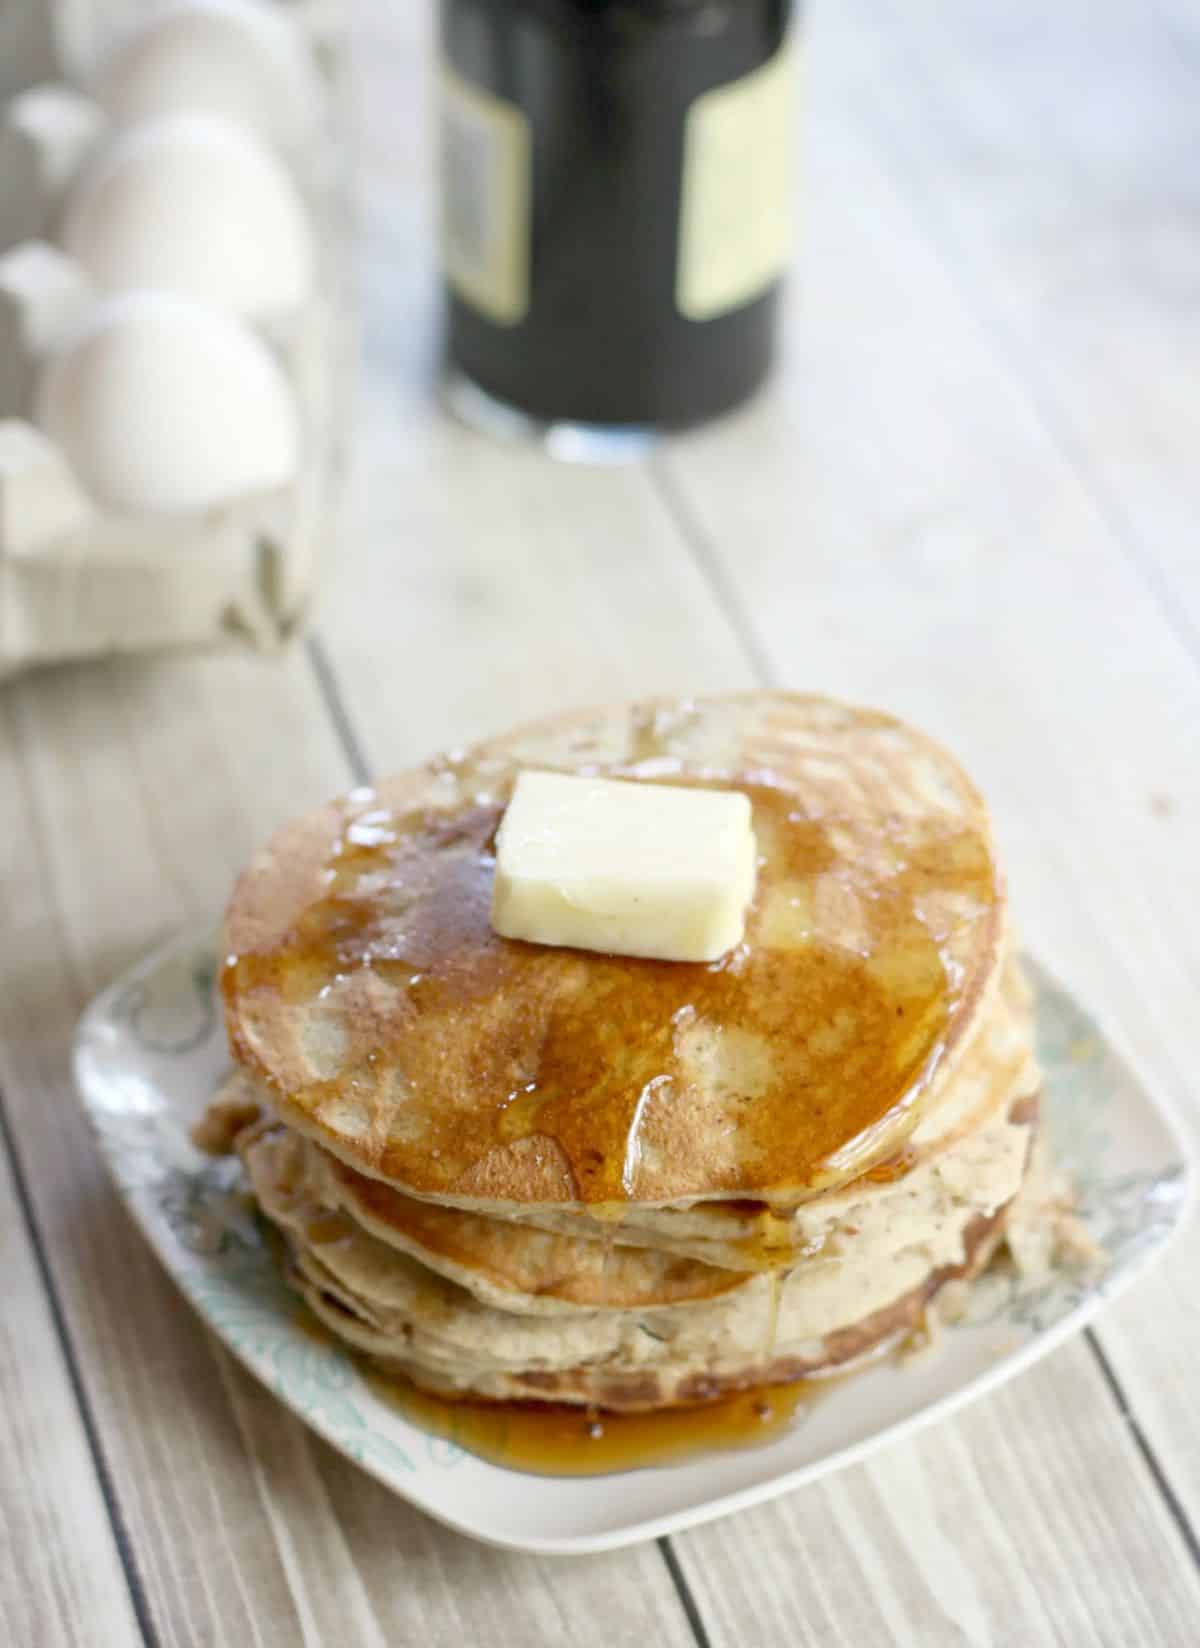 A pile of Low-Carb, Gluten-Free Pancakes on a plate.